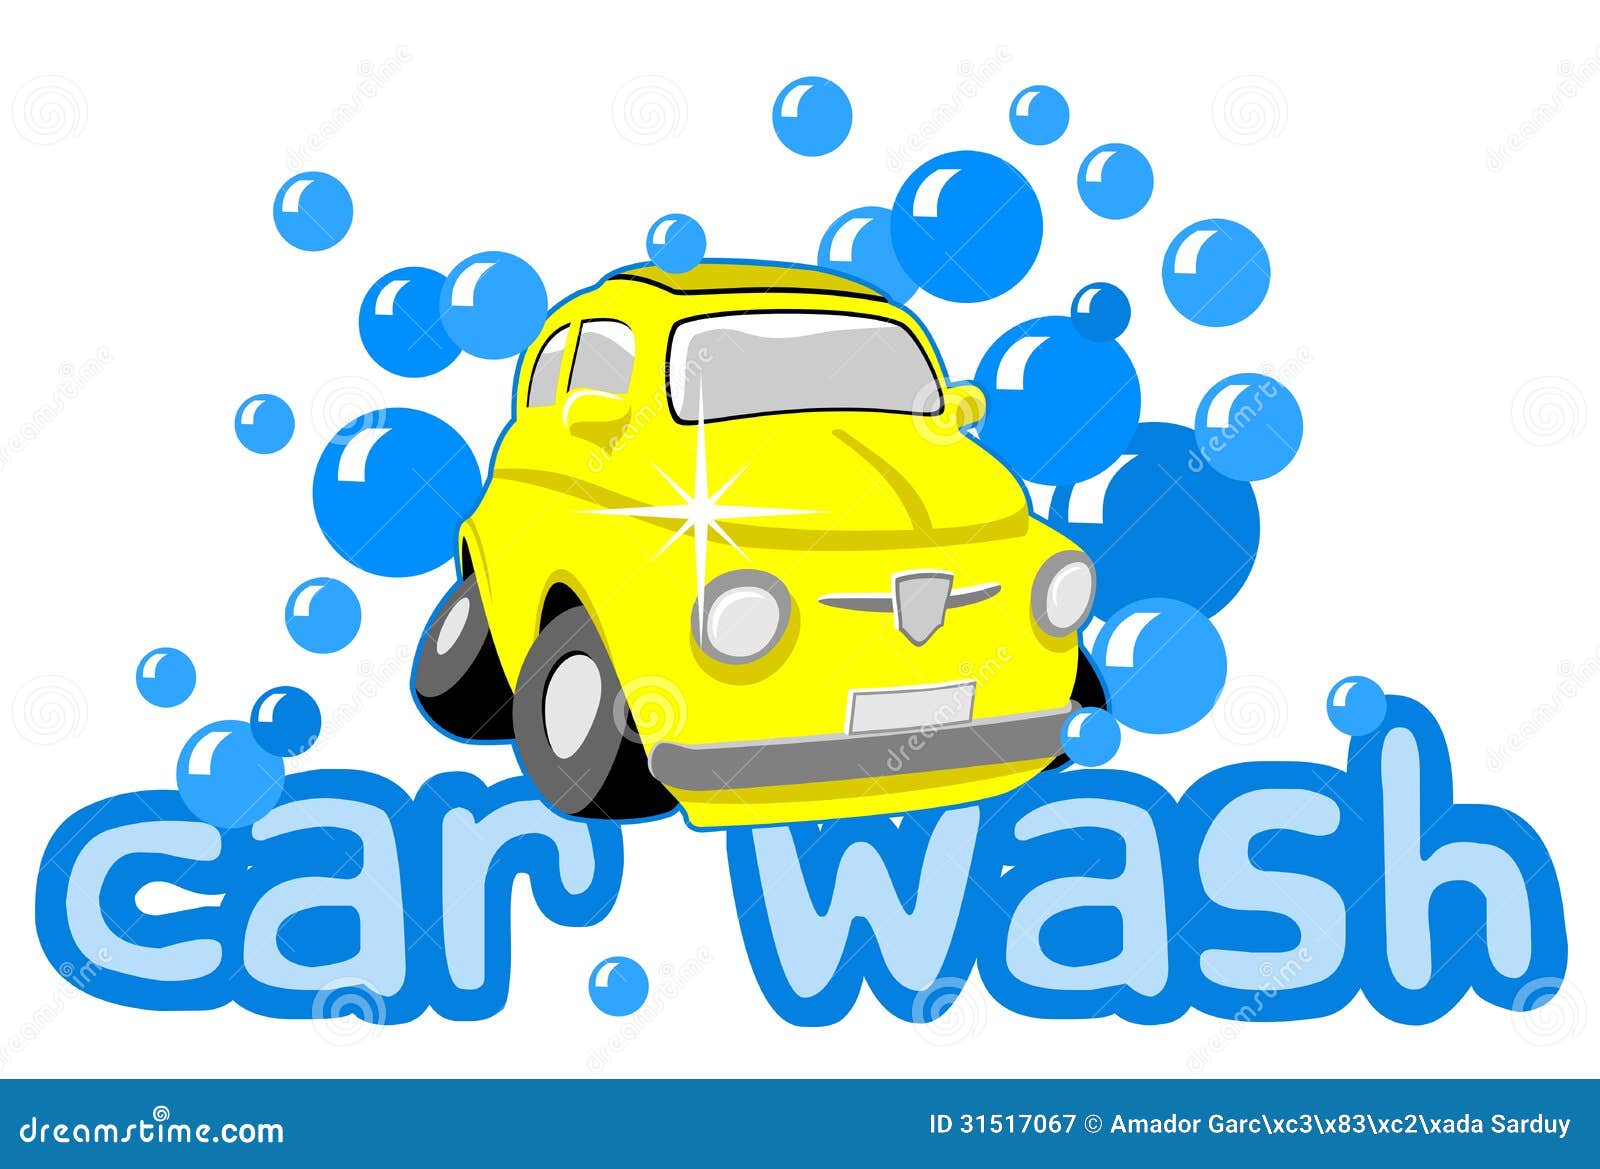 clipart for car wash - photo #39